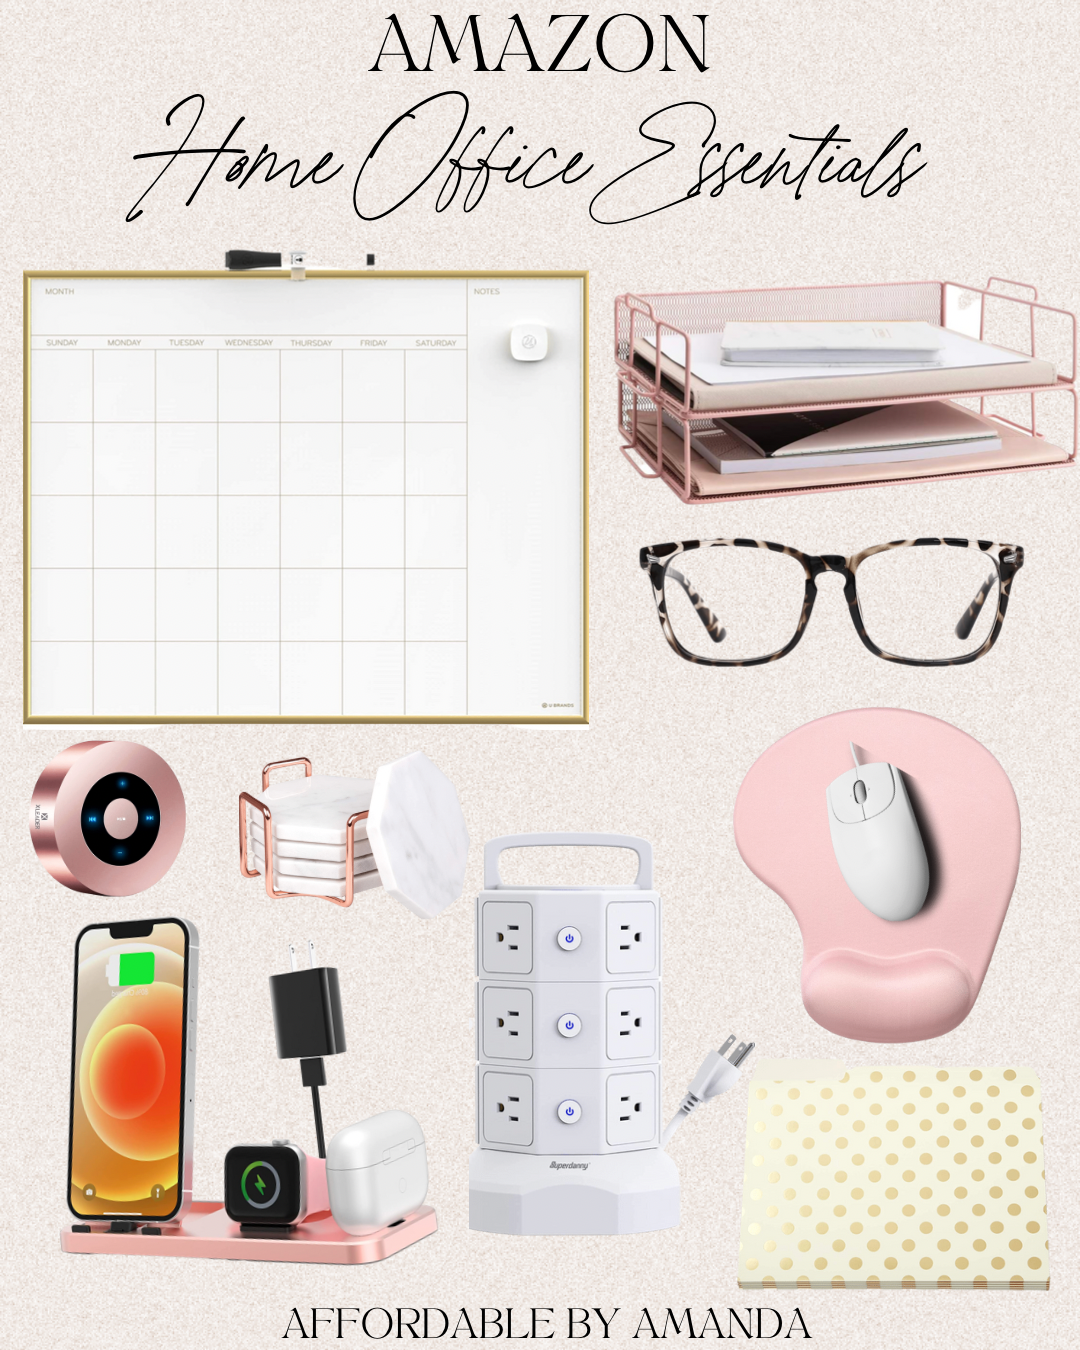 Amazon Home Office Must Haves - The 15 Best Home Office Products on Amazon - Amazon Home Office Essentials - Affordable by Amanda